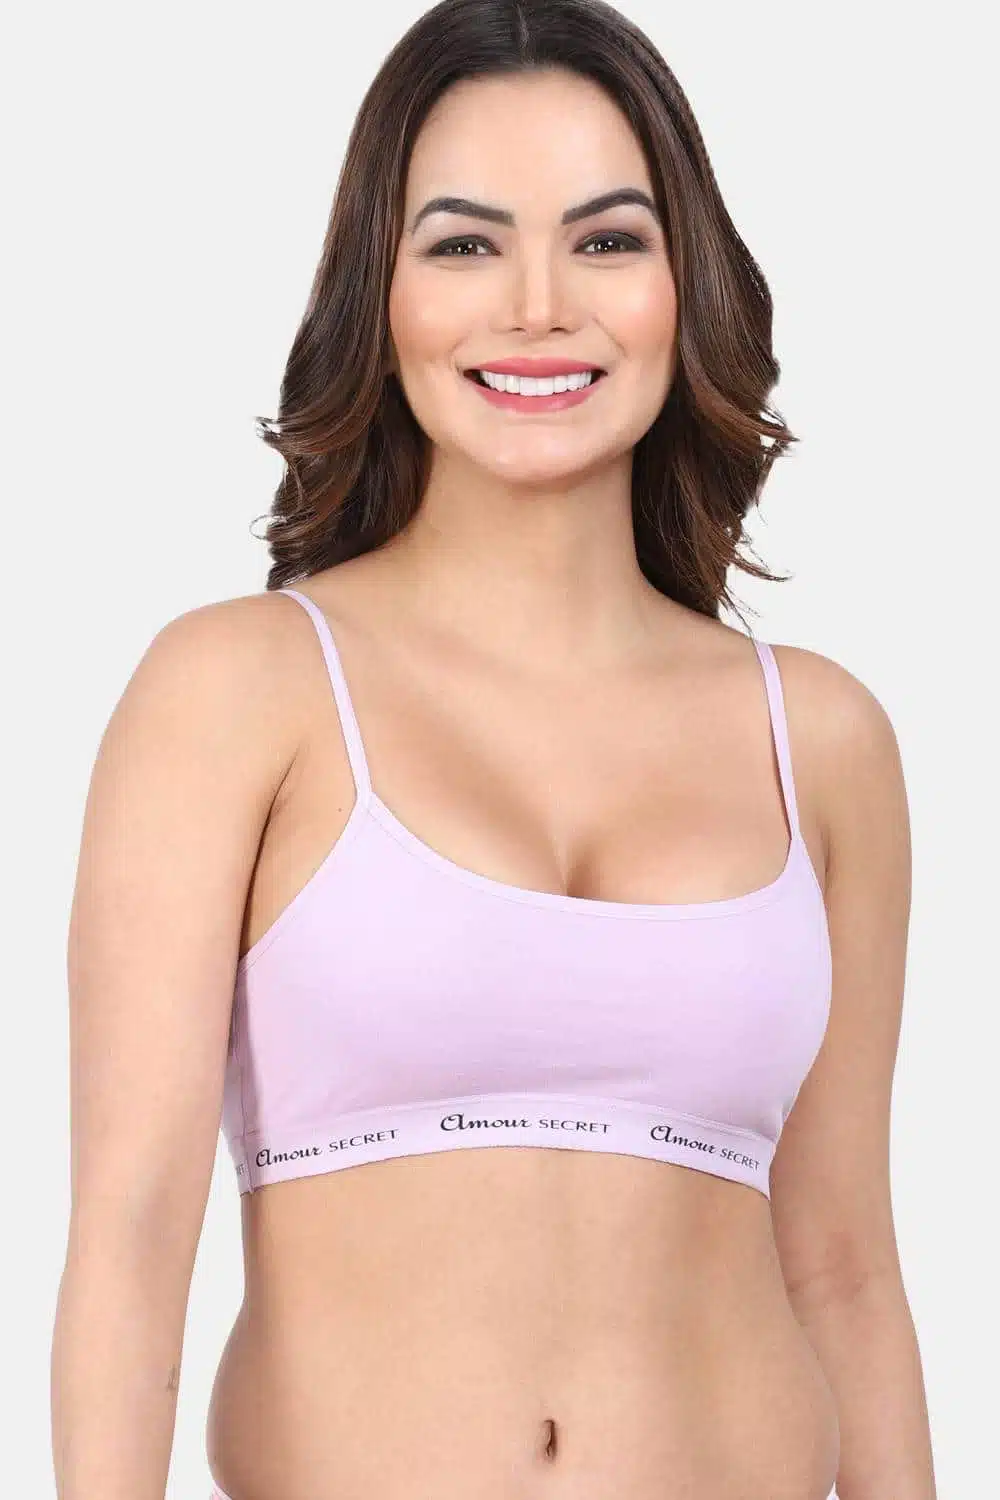 ANAND INDIA Seamless Air Bra For Women - Stretchable Non-Padded